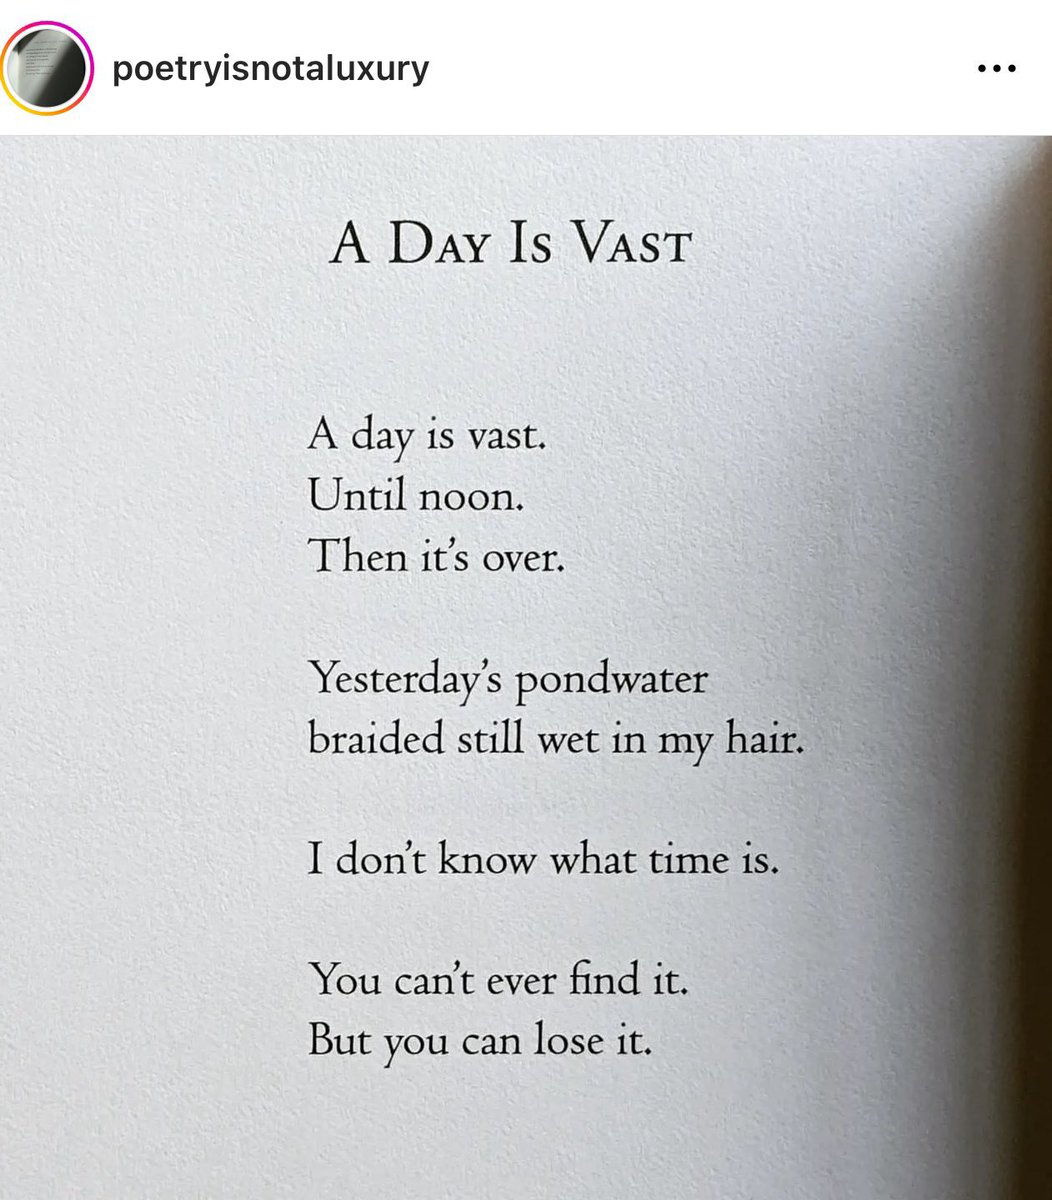 A Day Is Vast

A day is vast.
Until noon.
Then it’s over.

Yesterday’s pondwater
braided still wet in my hair.

I don’t know what time is.

You can’t ever find it.
But you can lose it.

Jane Hirshfield

Image courtesy @motleybookshelf